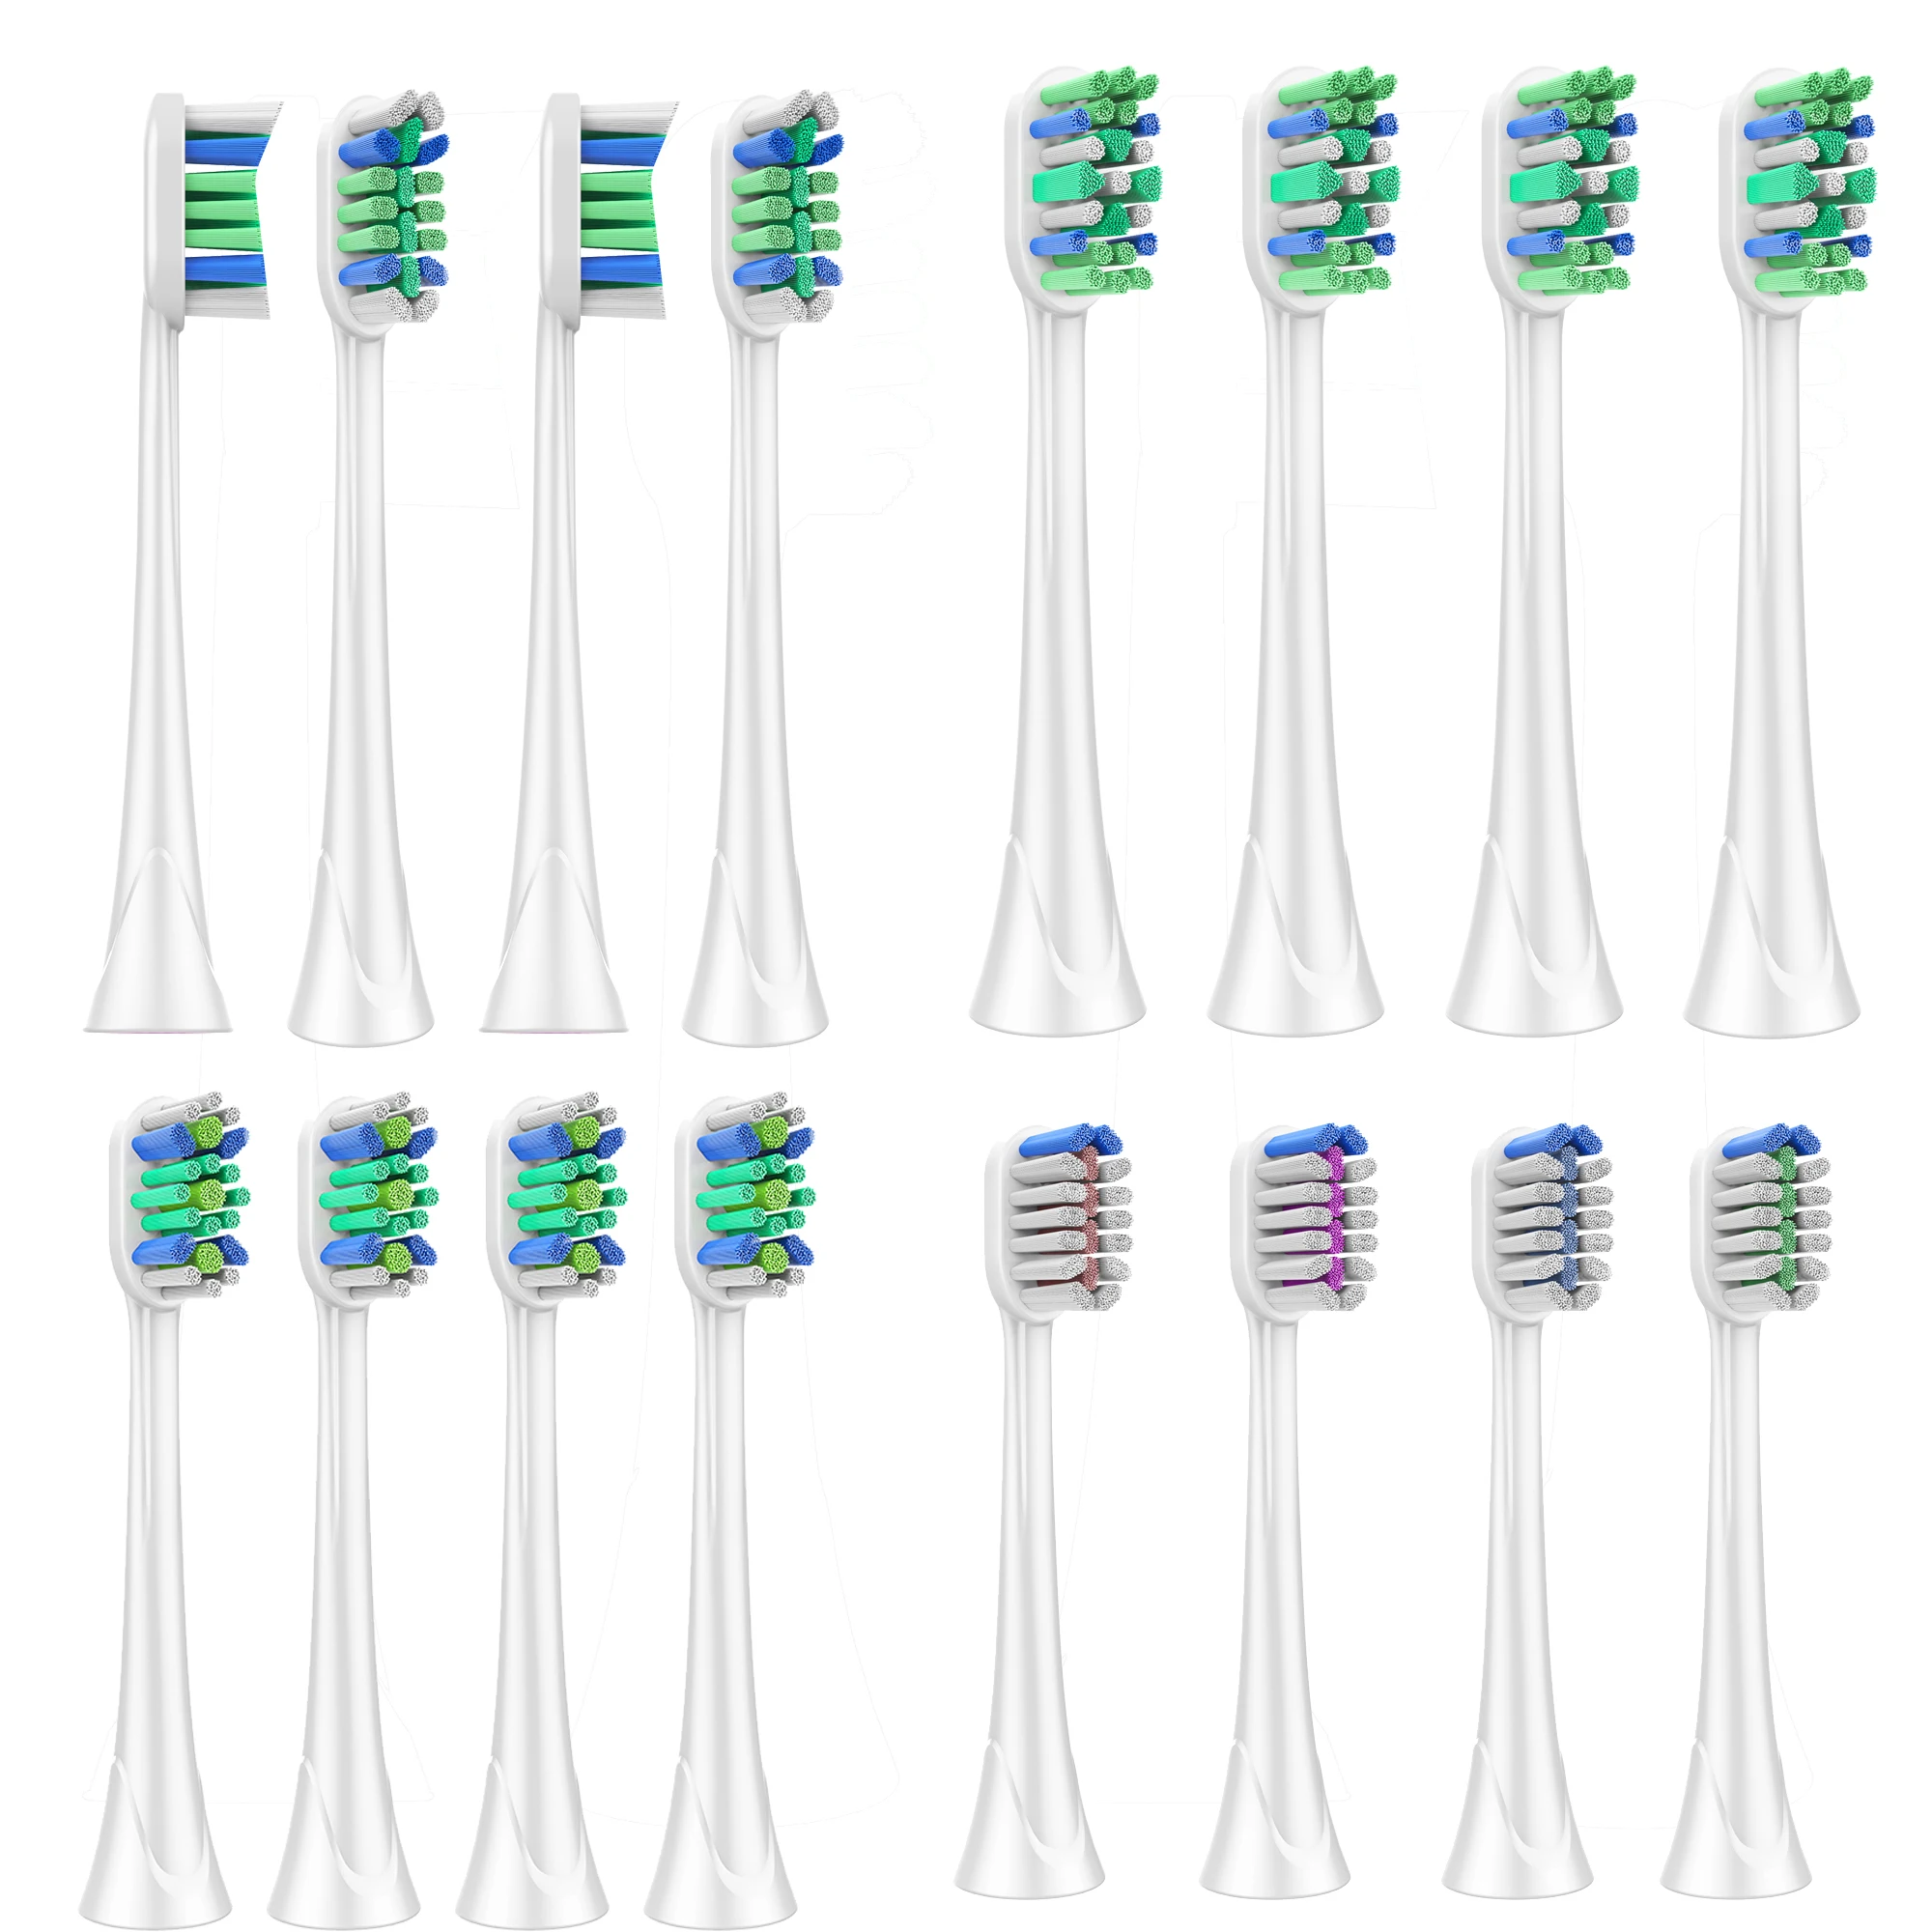 16Pcs Replacement Toothbrush Heads Compatible with  Sonicare, hx6014 DiamondClean, HealthyWhite, FlexCare